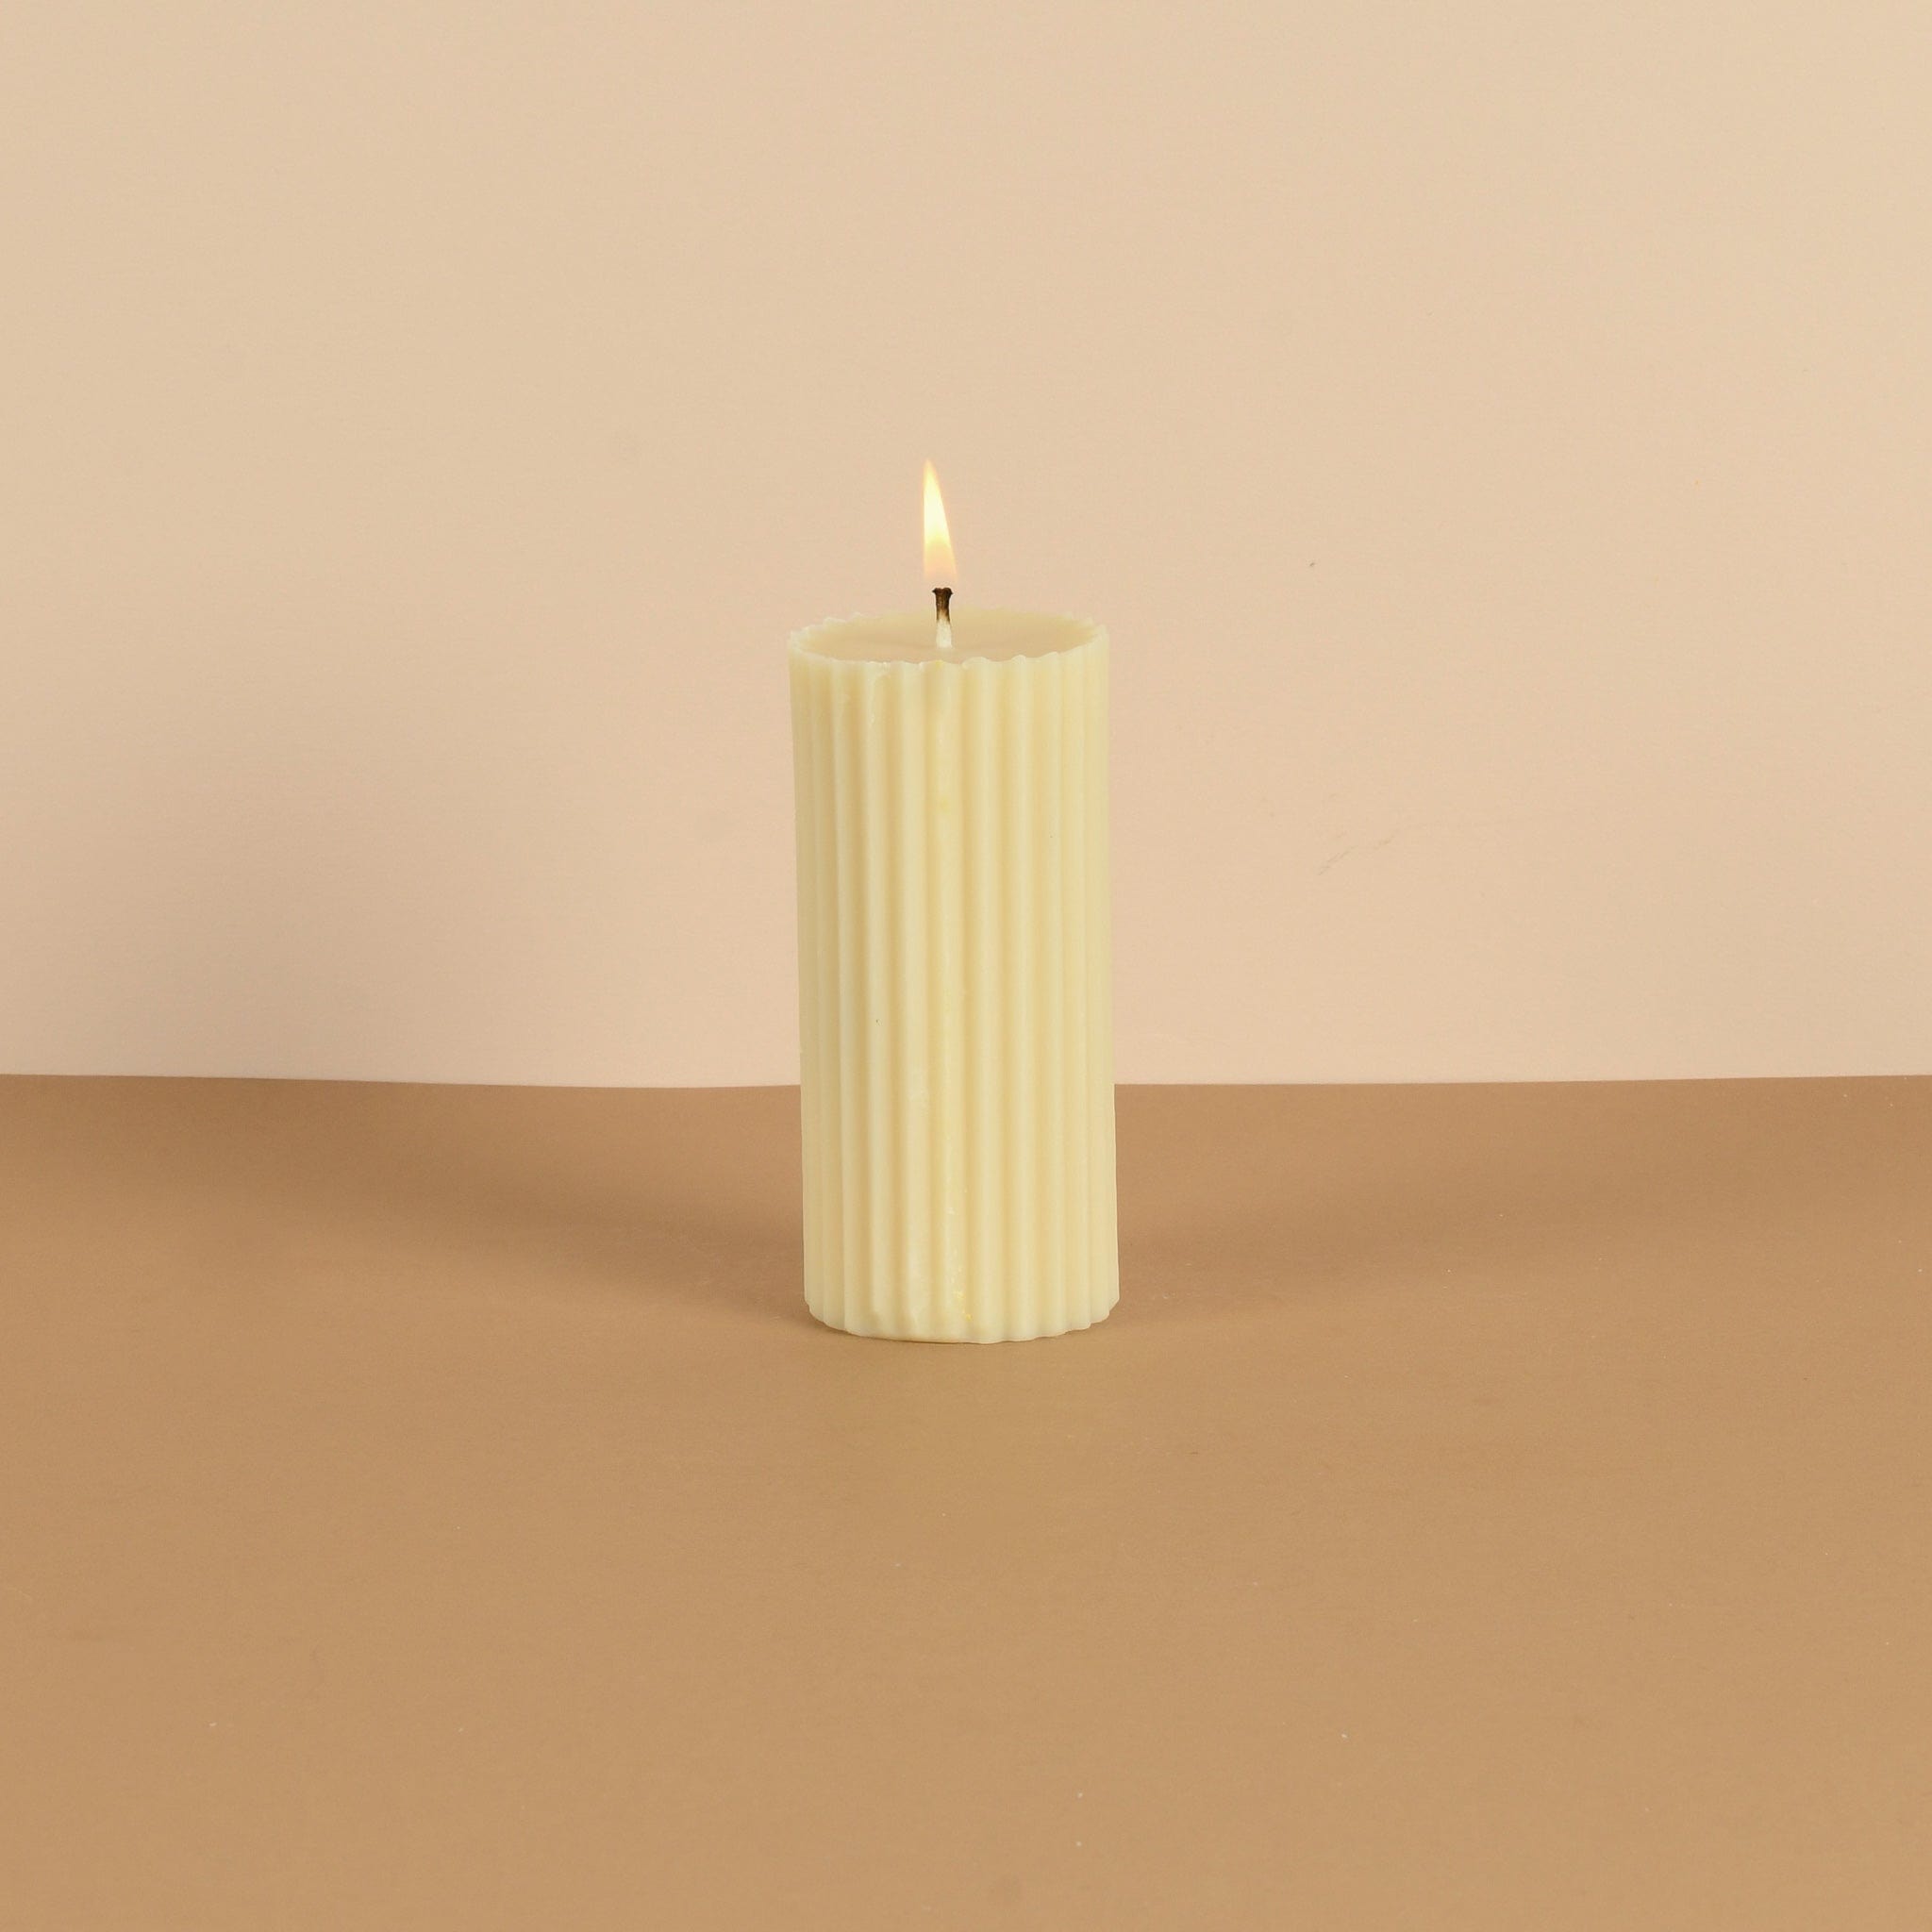 Belief - Fête Tropical Scented Candle